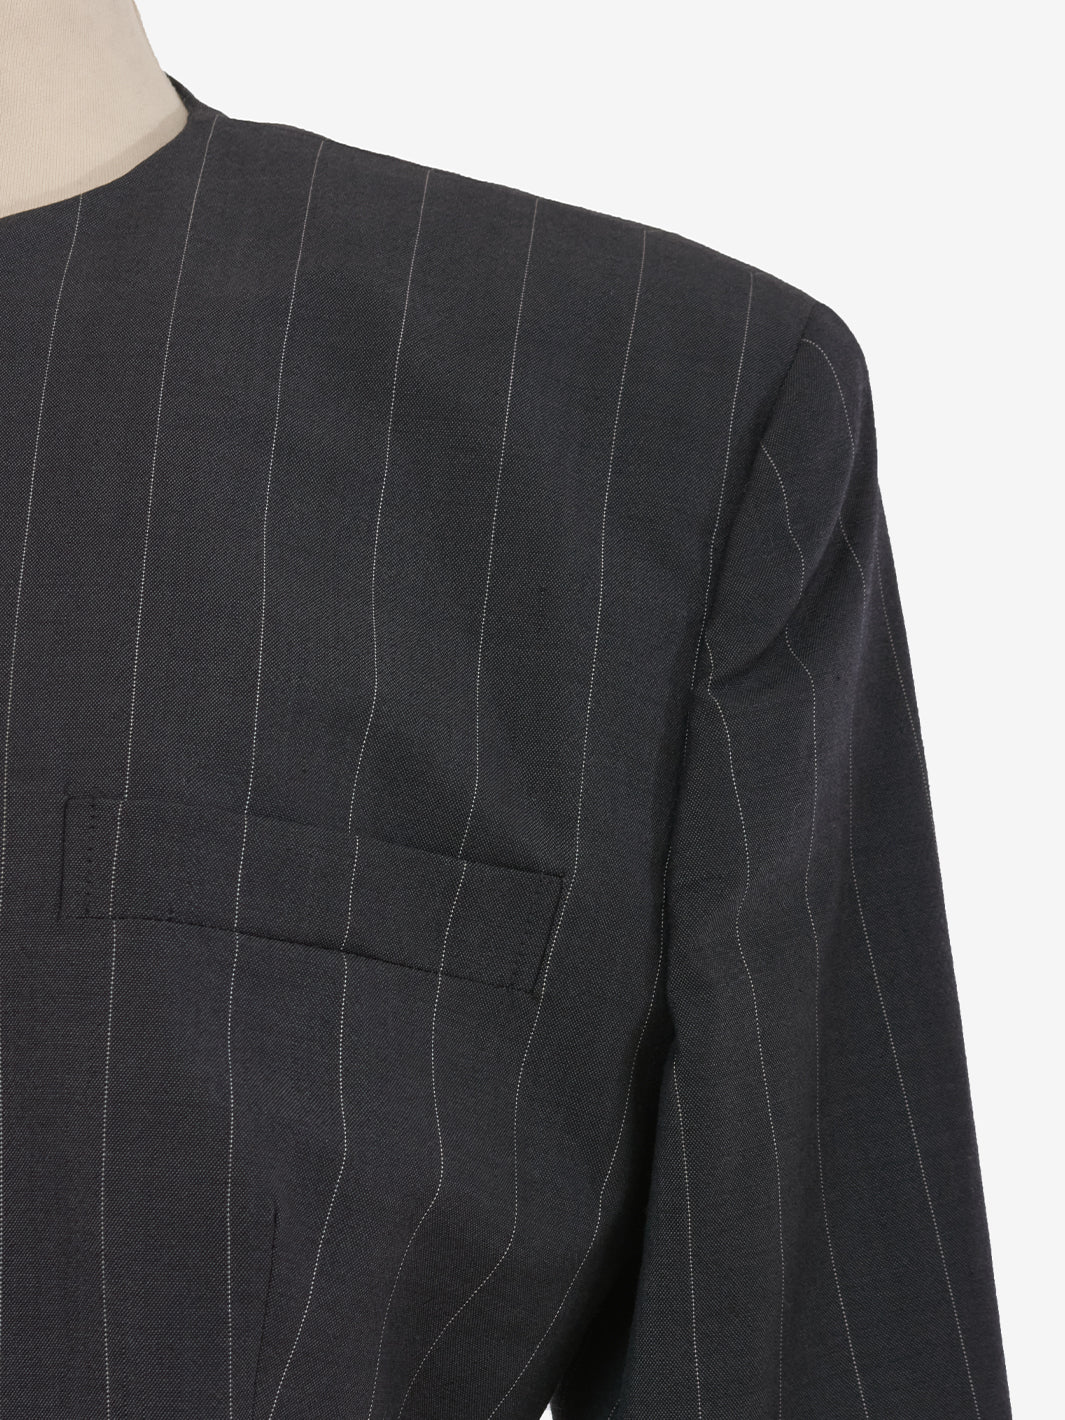 Gianni Versace grey wool pinstripe suit and jacket